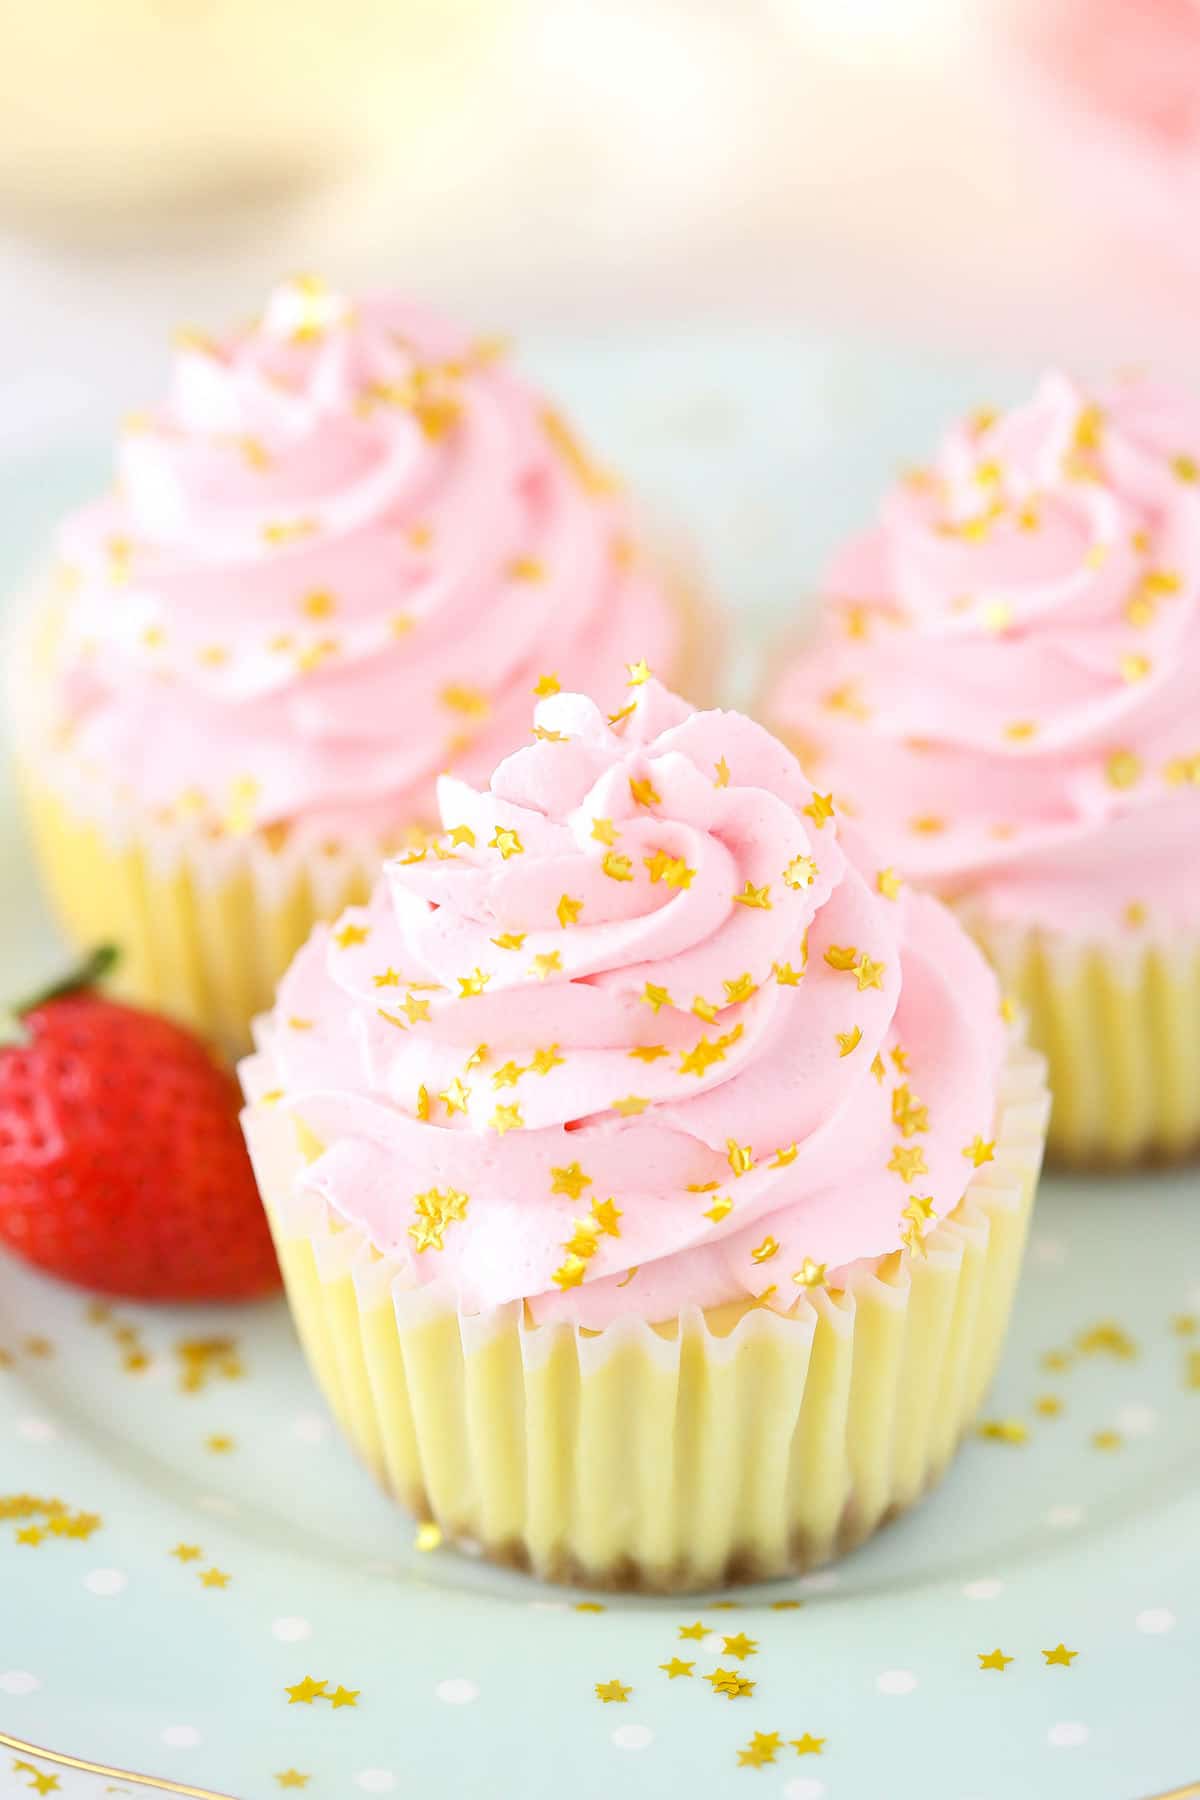 A close-up shot of three strawberry champagne cheesecake cupcakes on top of a polka dotted plate